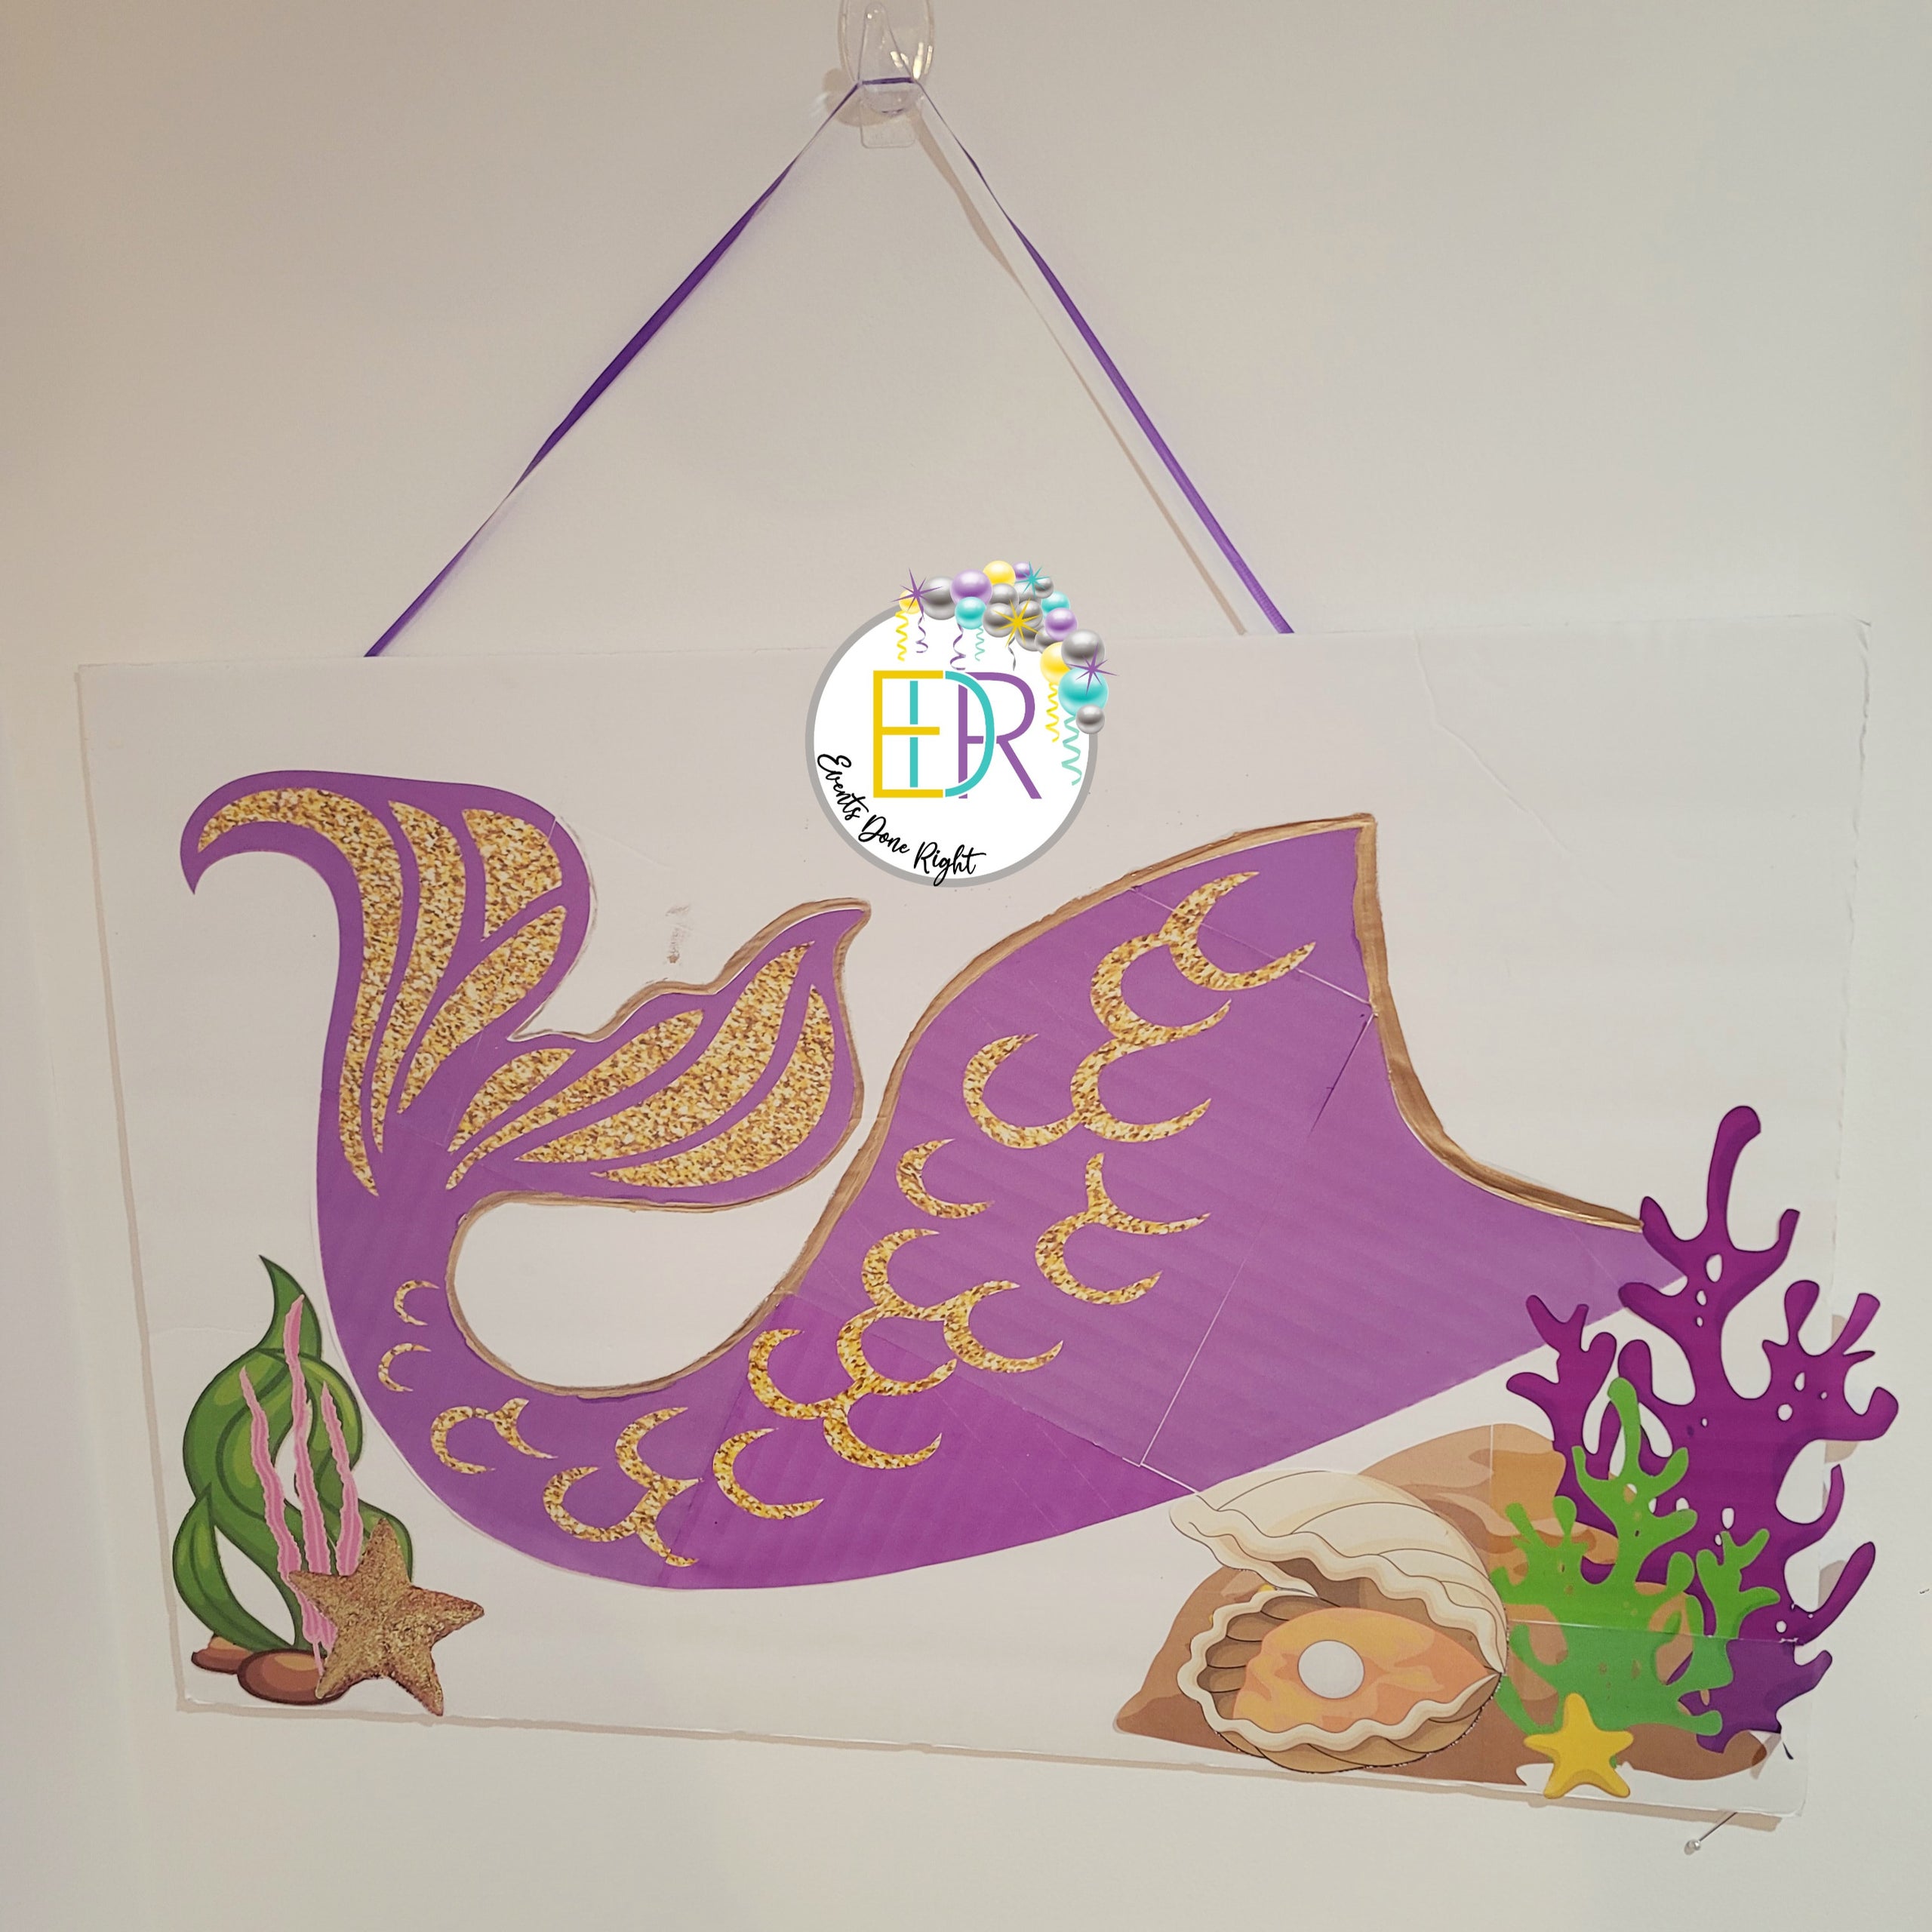 Mermaid Under the Sea Theme Party Games Tail Scales Seaweed Shells